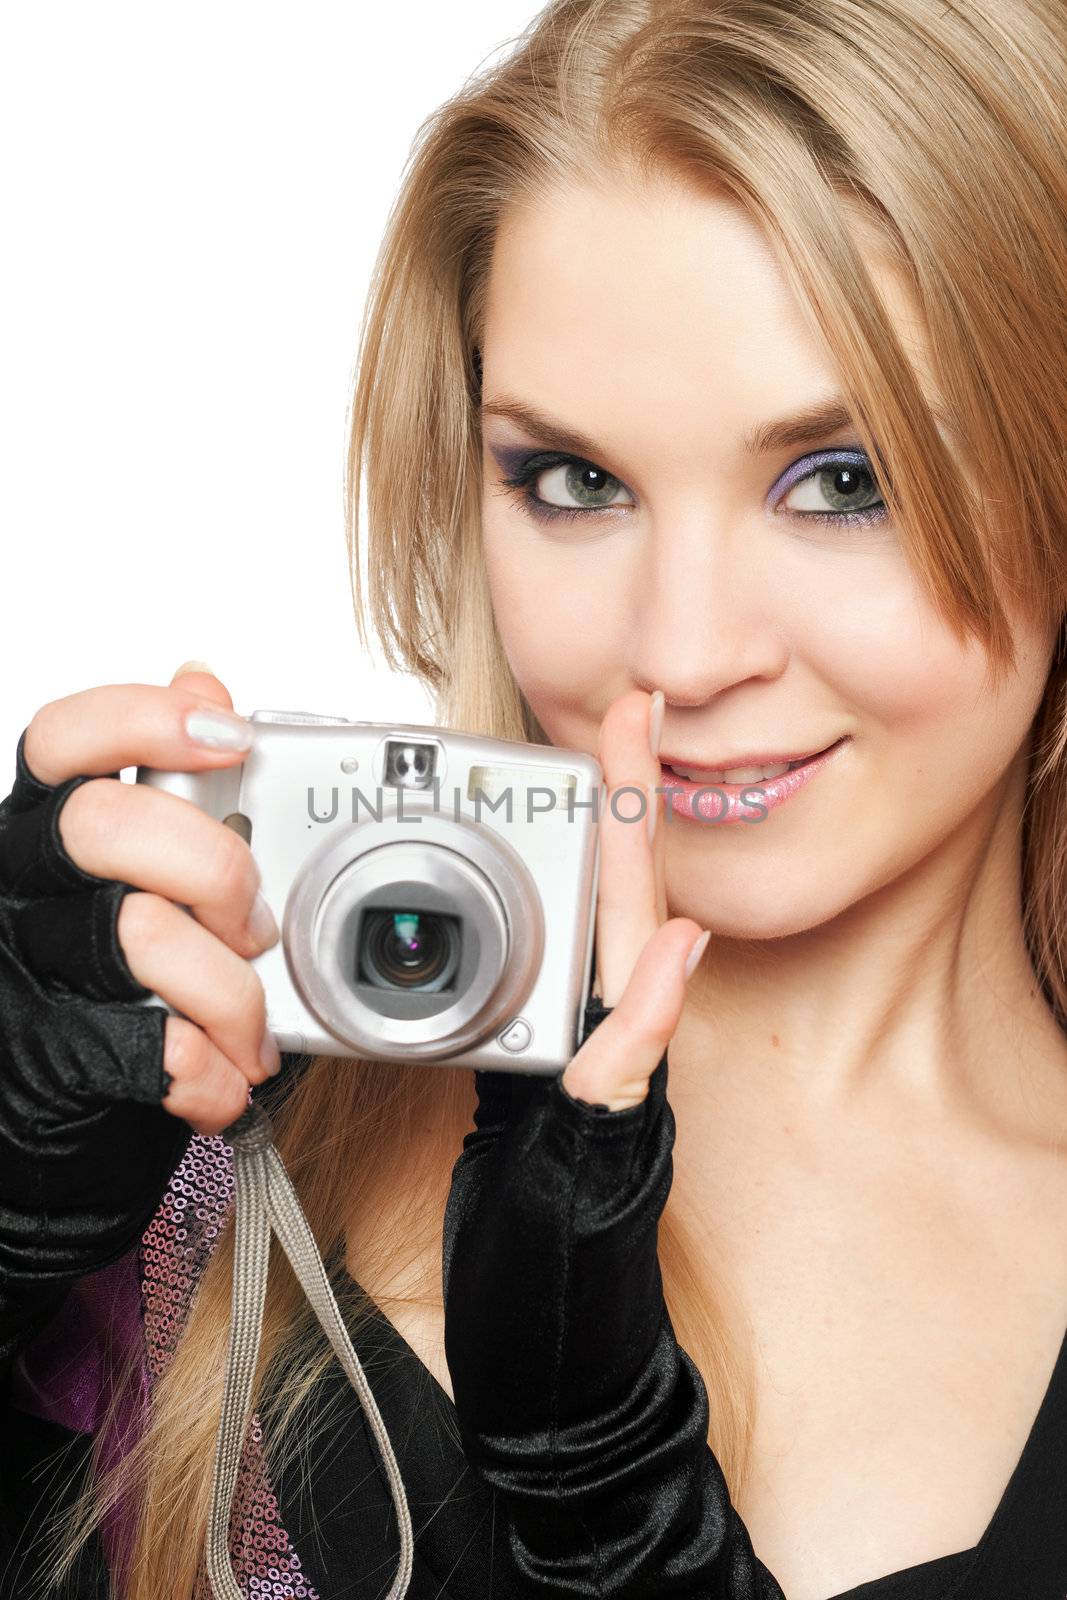 Smiling beautiful blonde holding a photo camera. Isolated